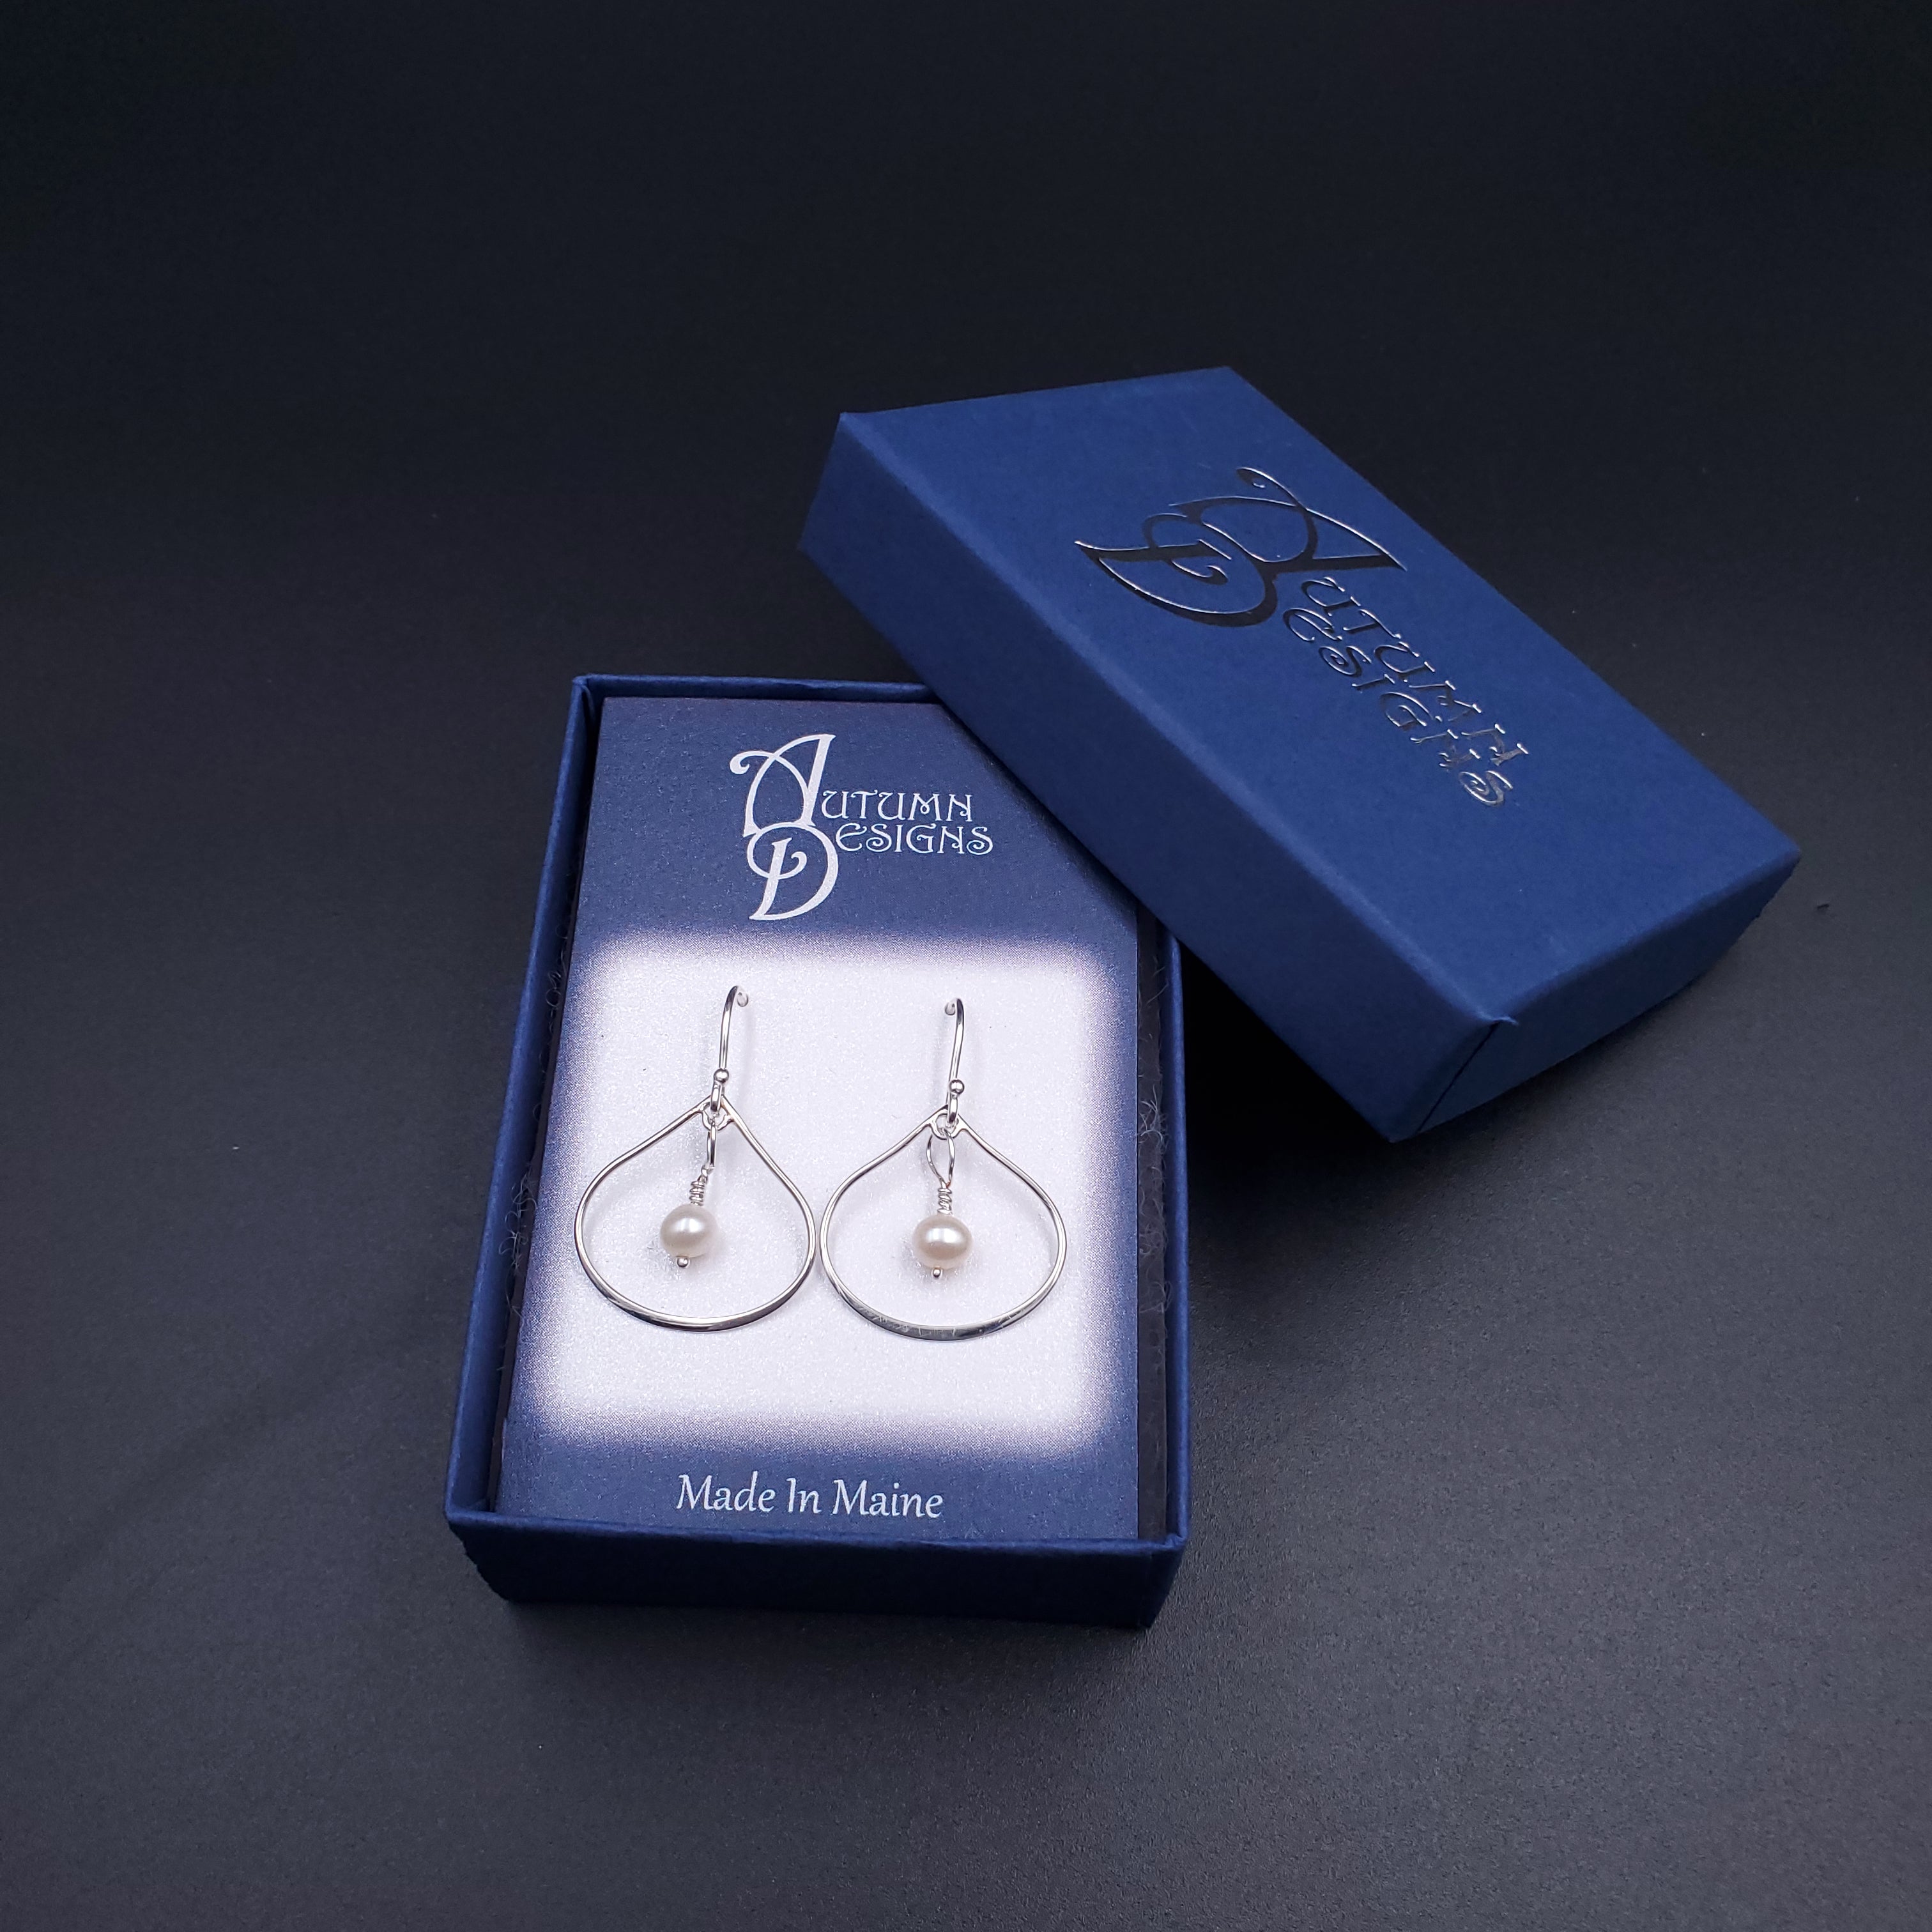 silver teardrop earrings with pearl accents shown in gift box